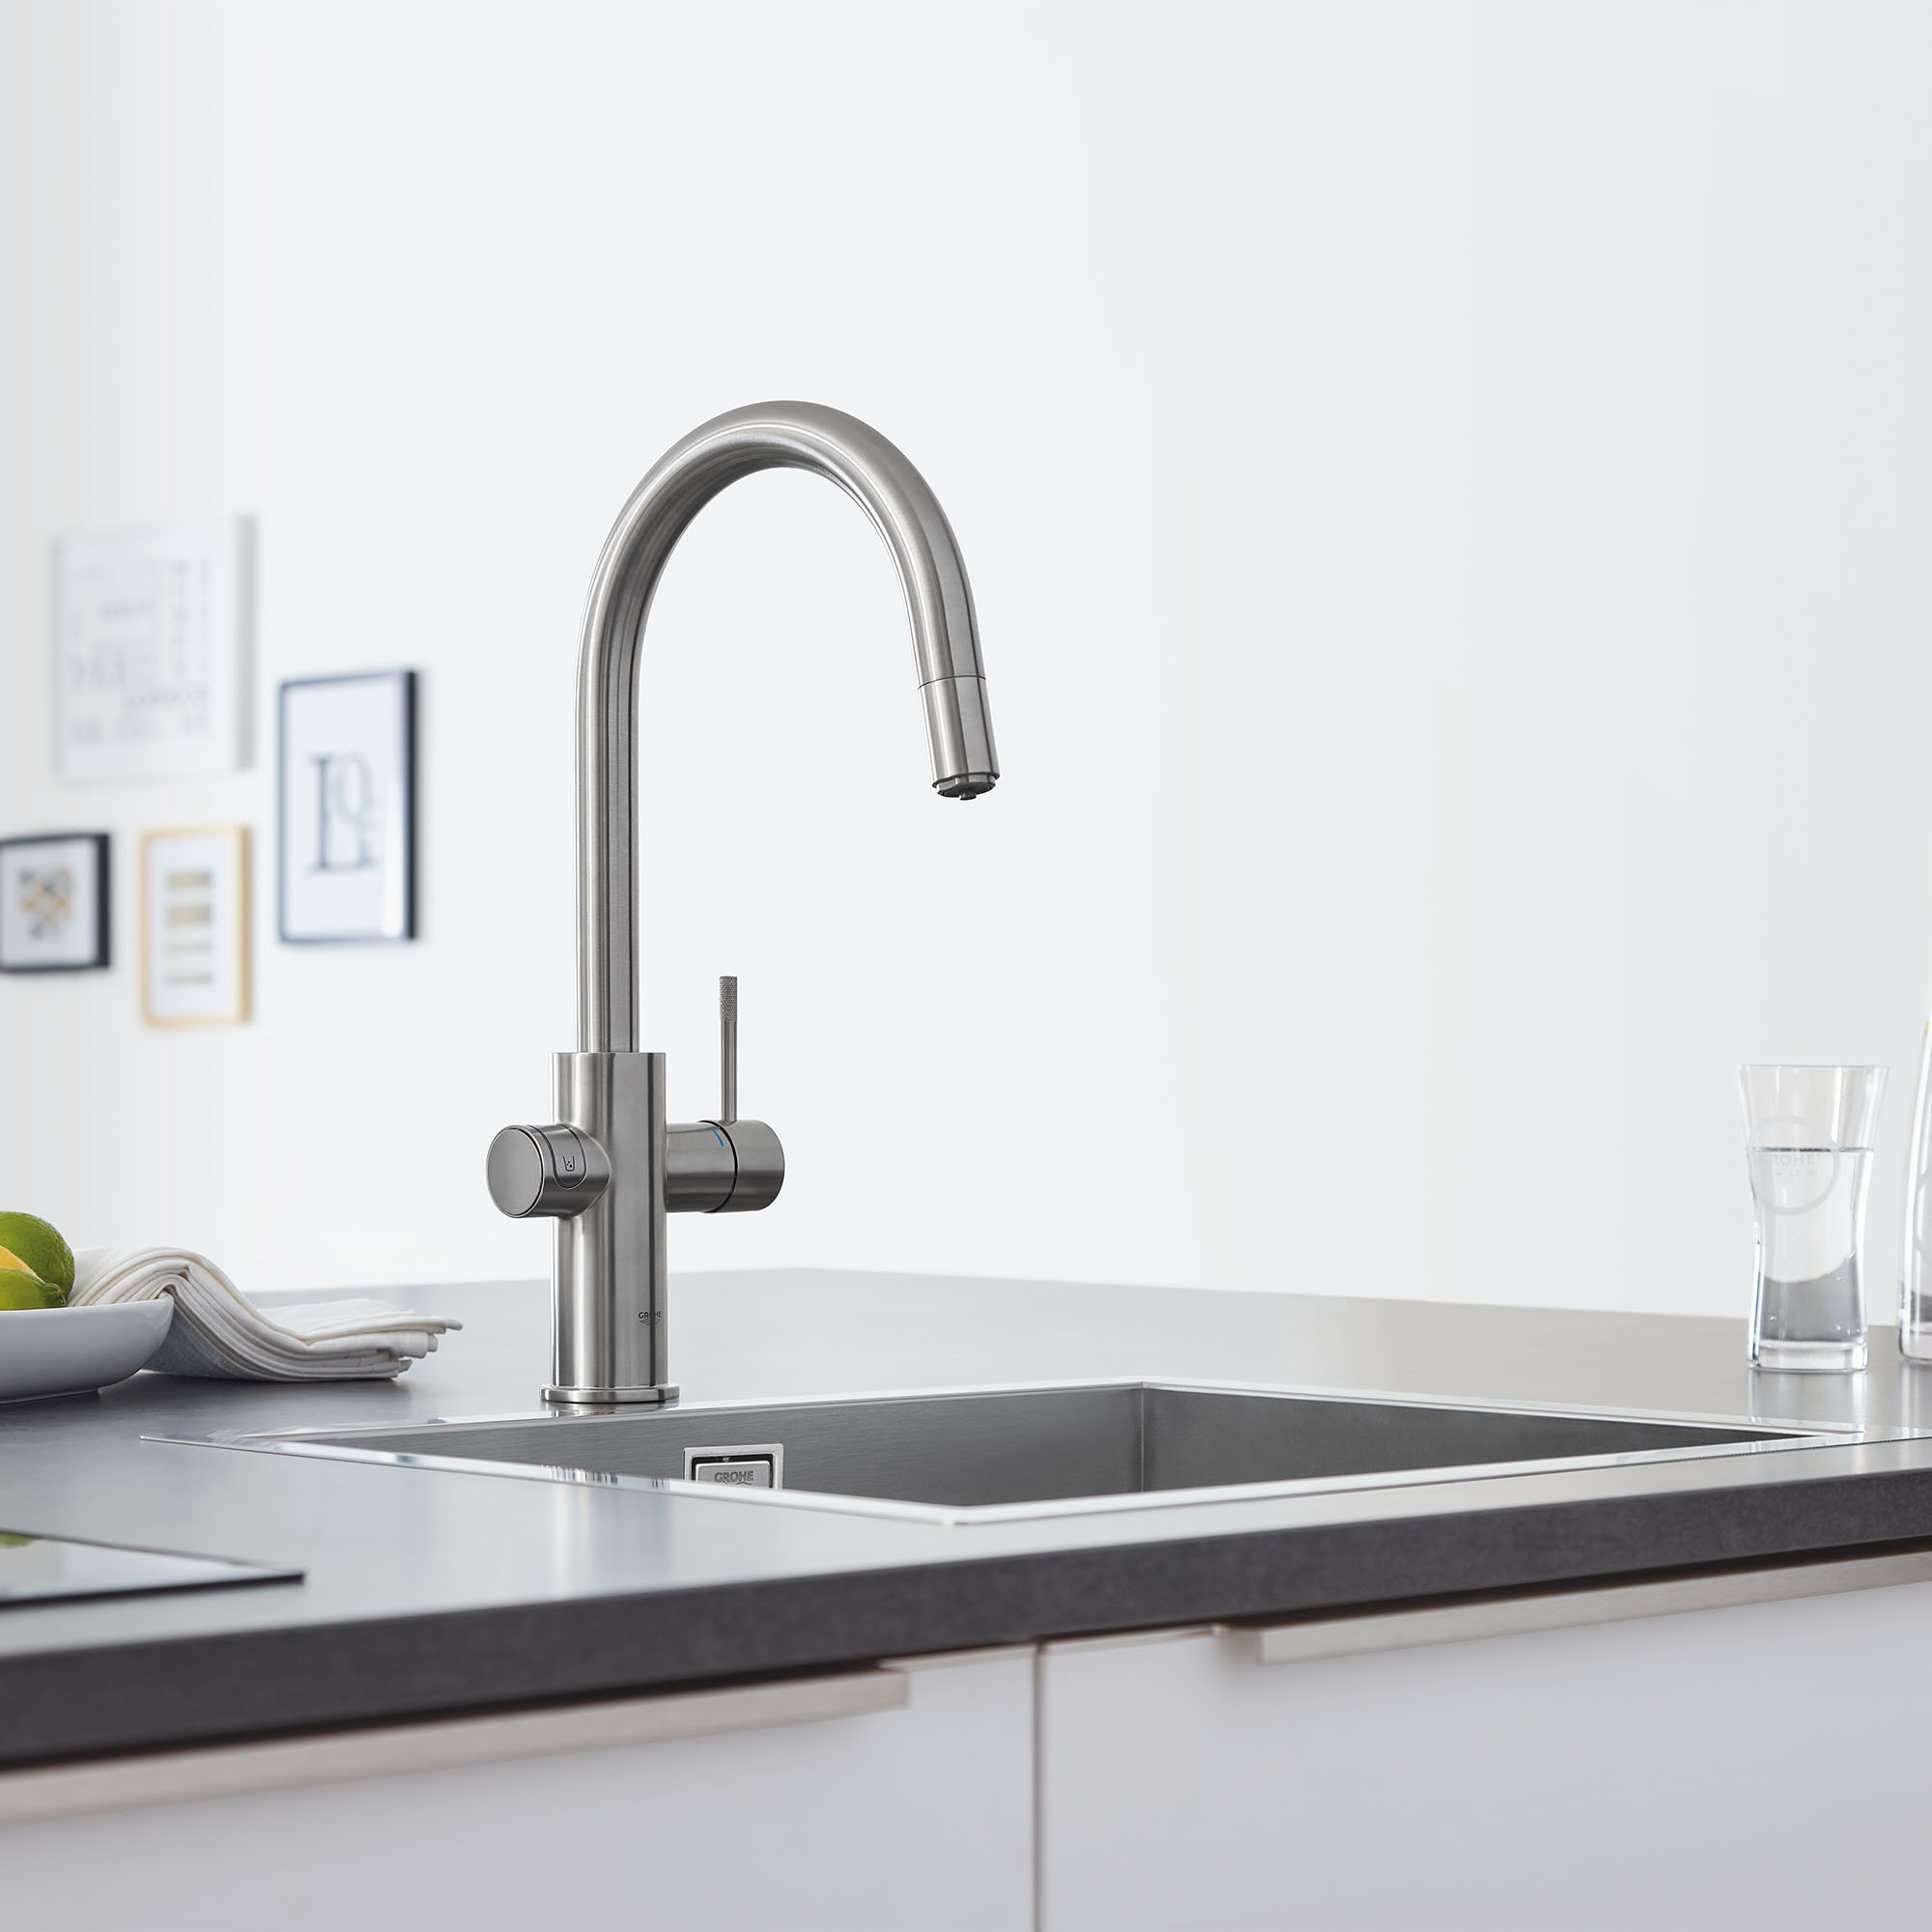 GROHE Blue Single-Handle Pull Down Kitchen Faucet Single Spray 1.75 GPM (6.6 L/min) with Chilled & Sparkling Water